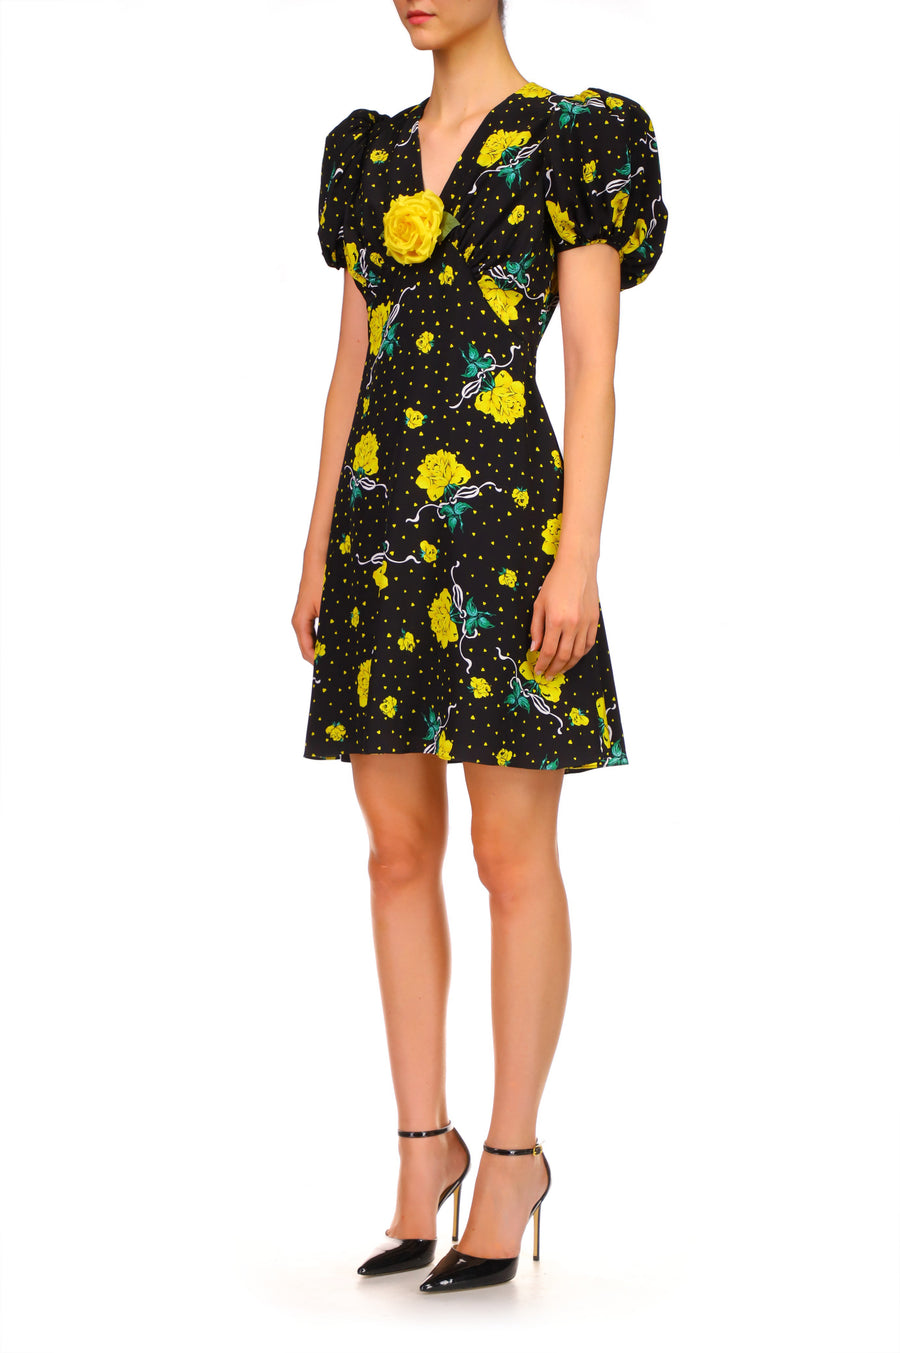 Yellow Floral Dress For Fall - Blush & Blooms